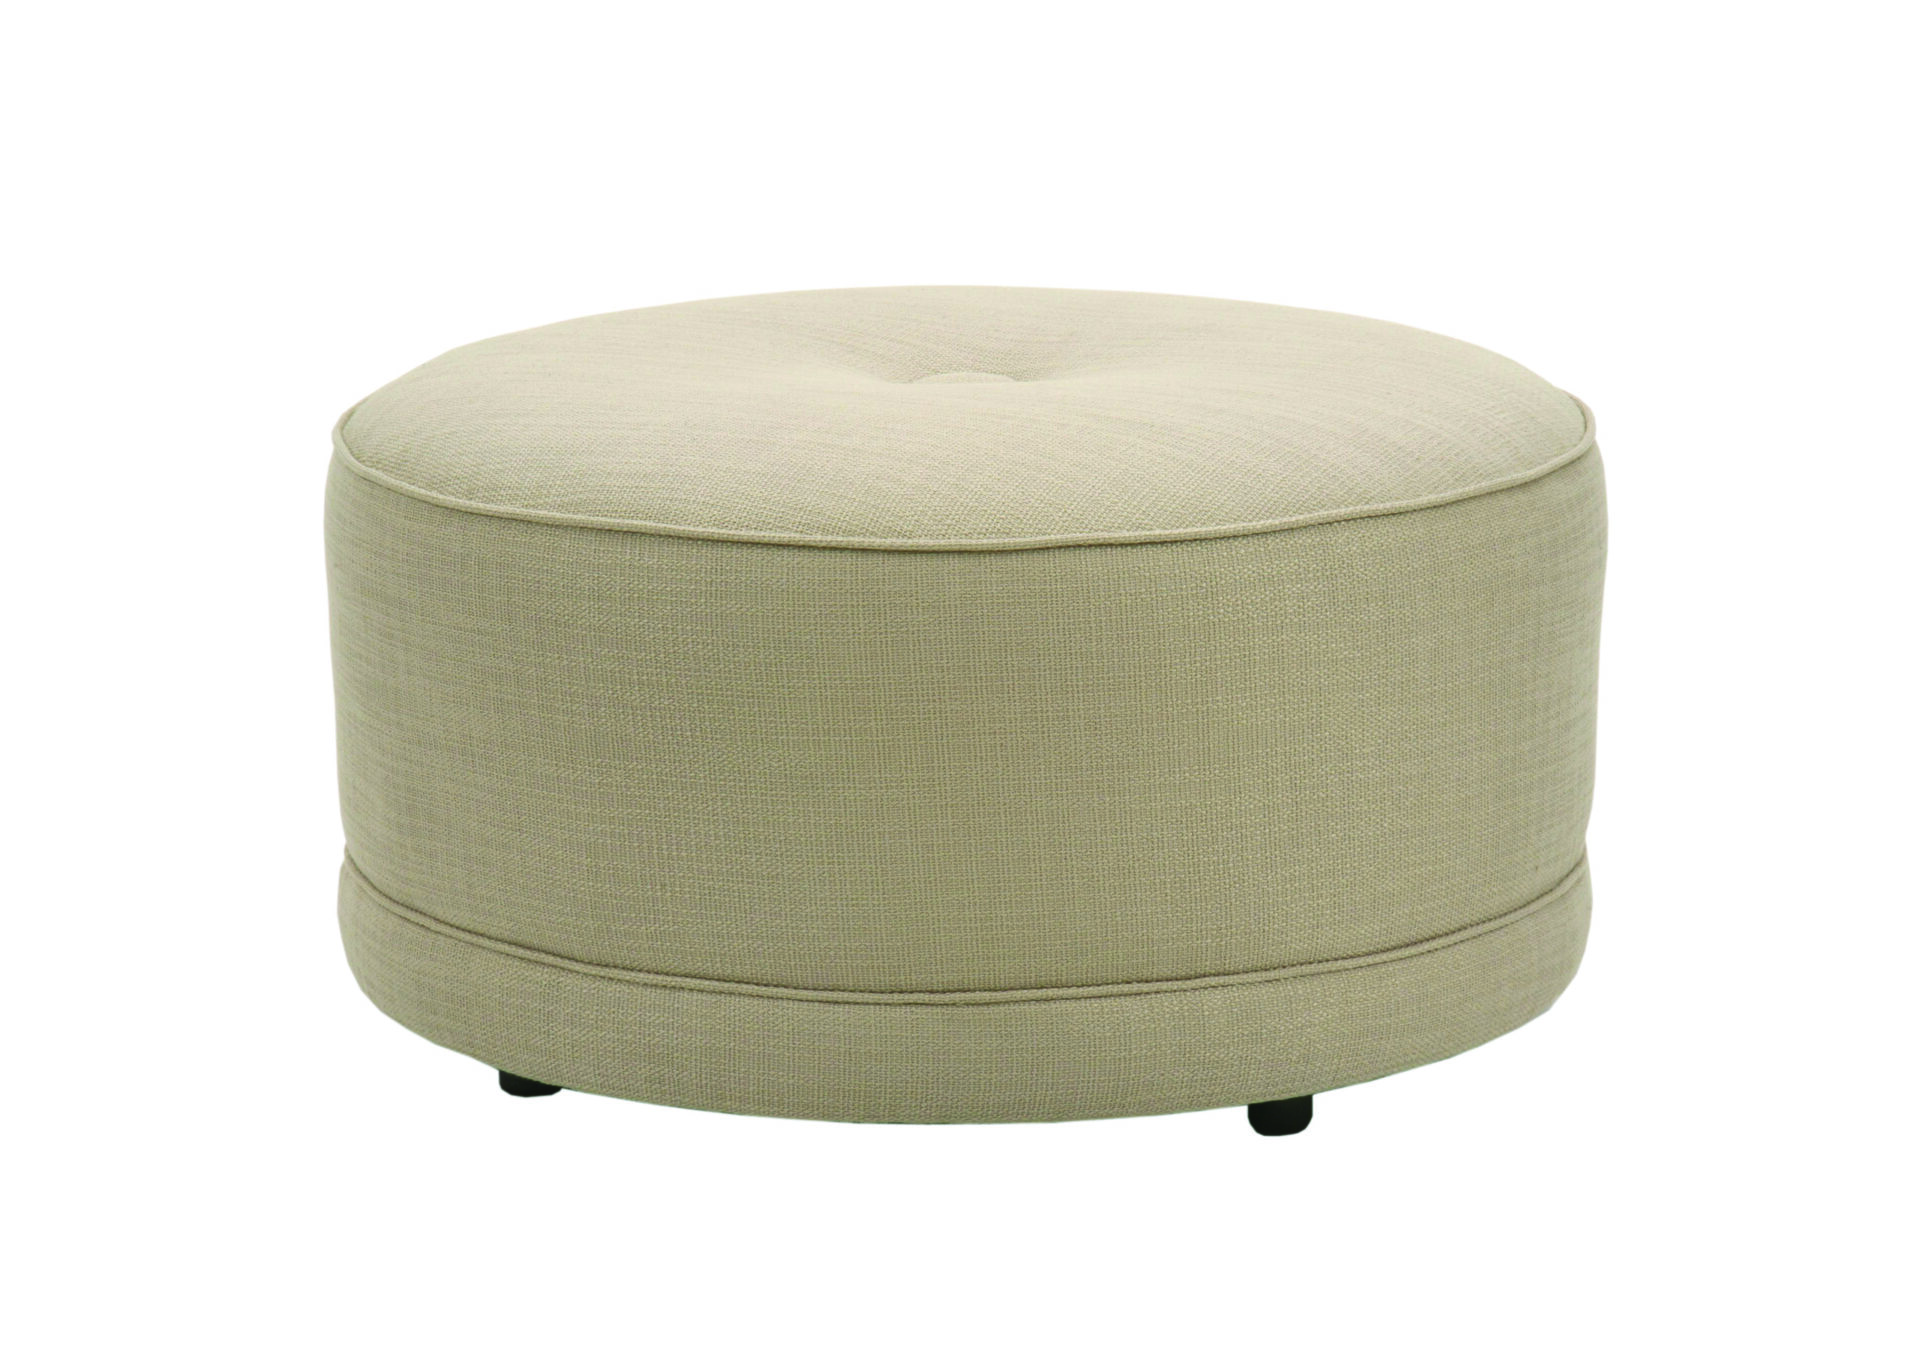 Clyde upholstered chairs and ottomans - Custom bedroom furniture with high end, bedroom textiles | Blend Home Furnishings